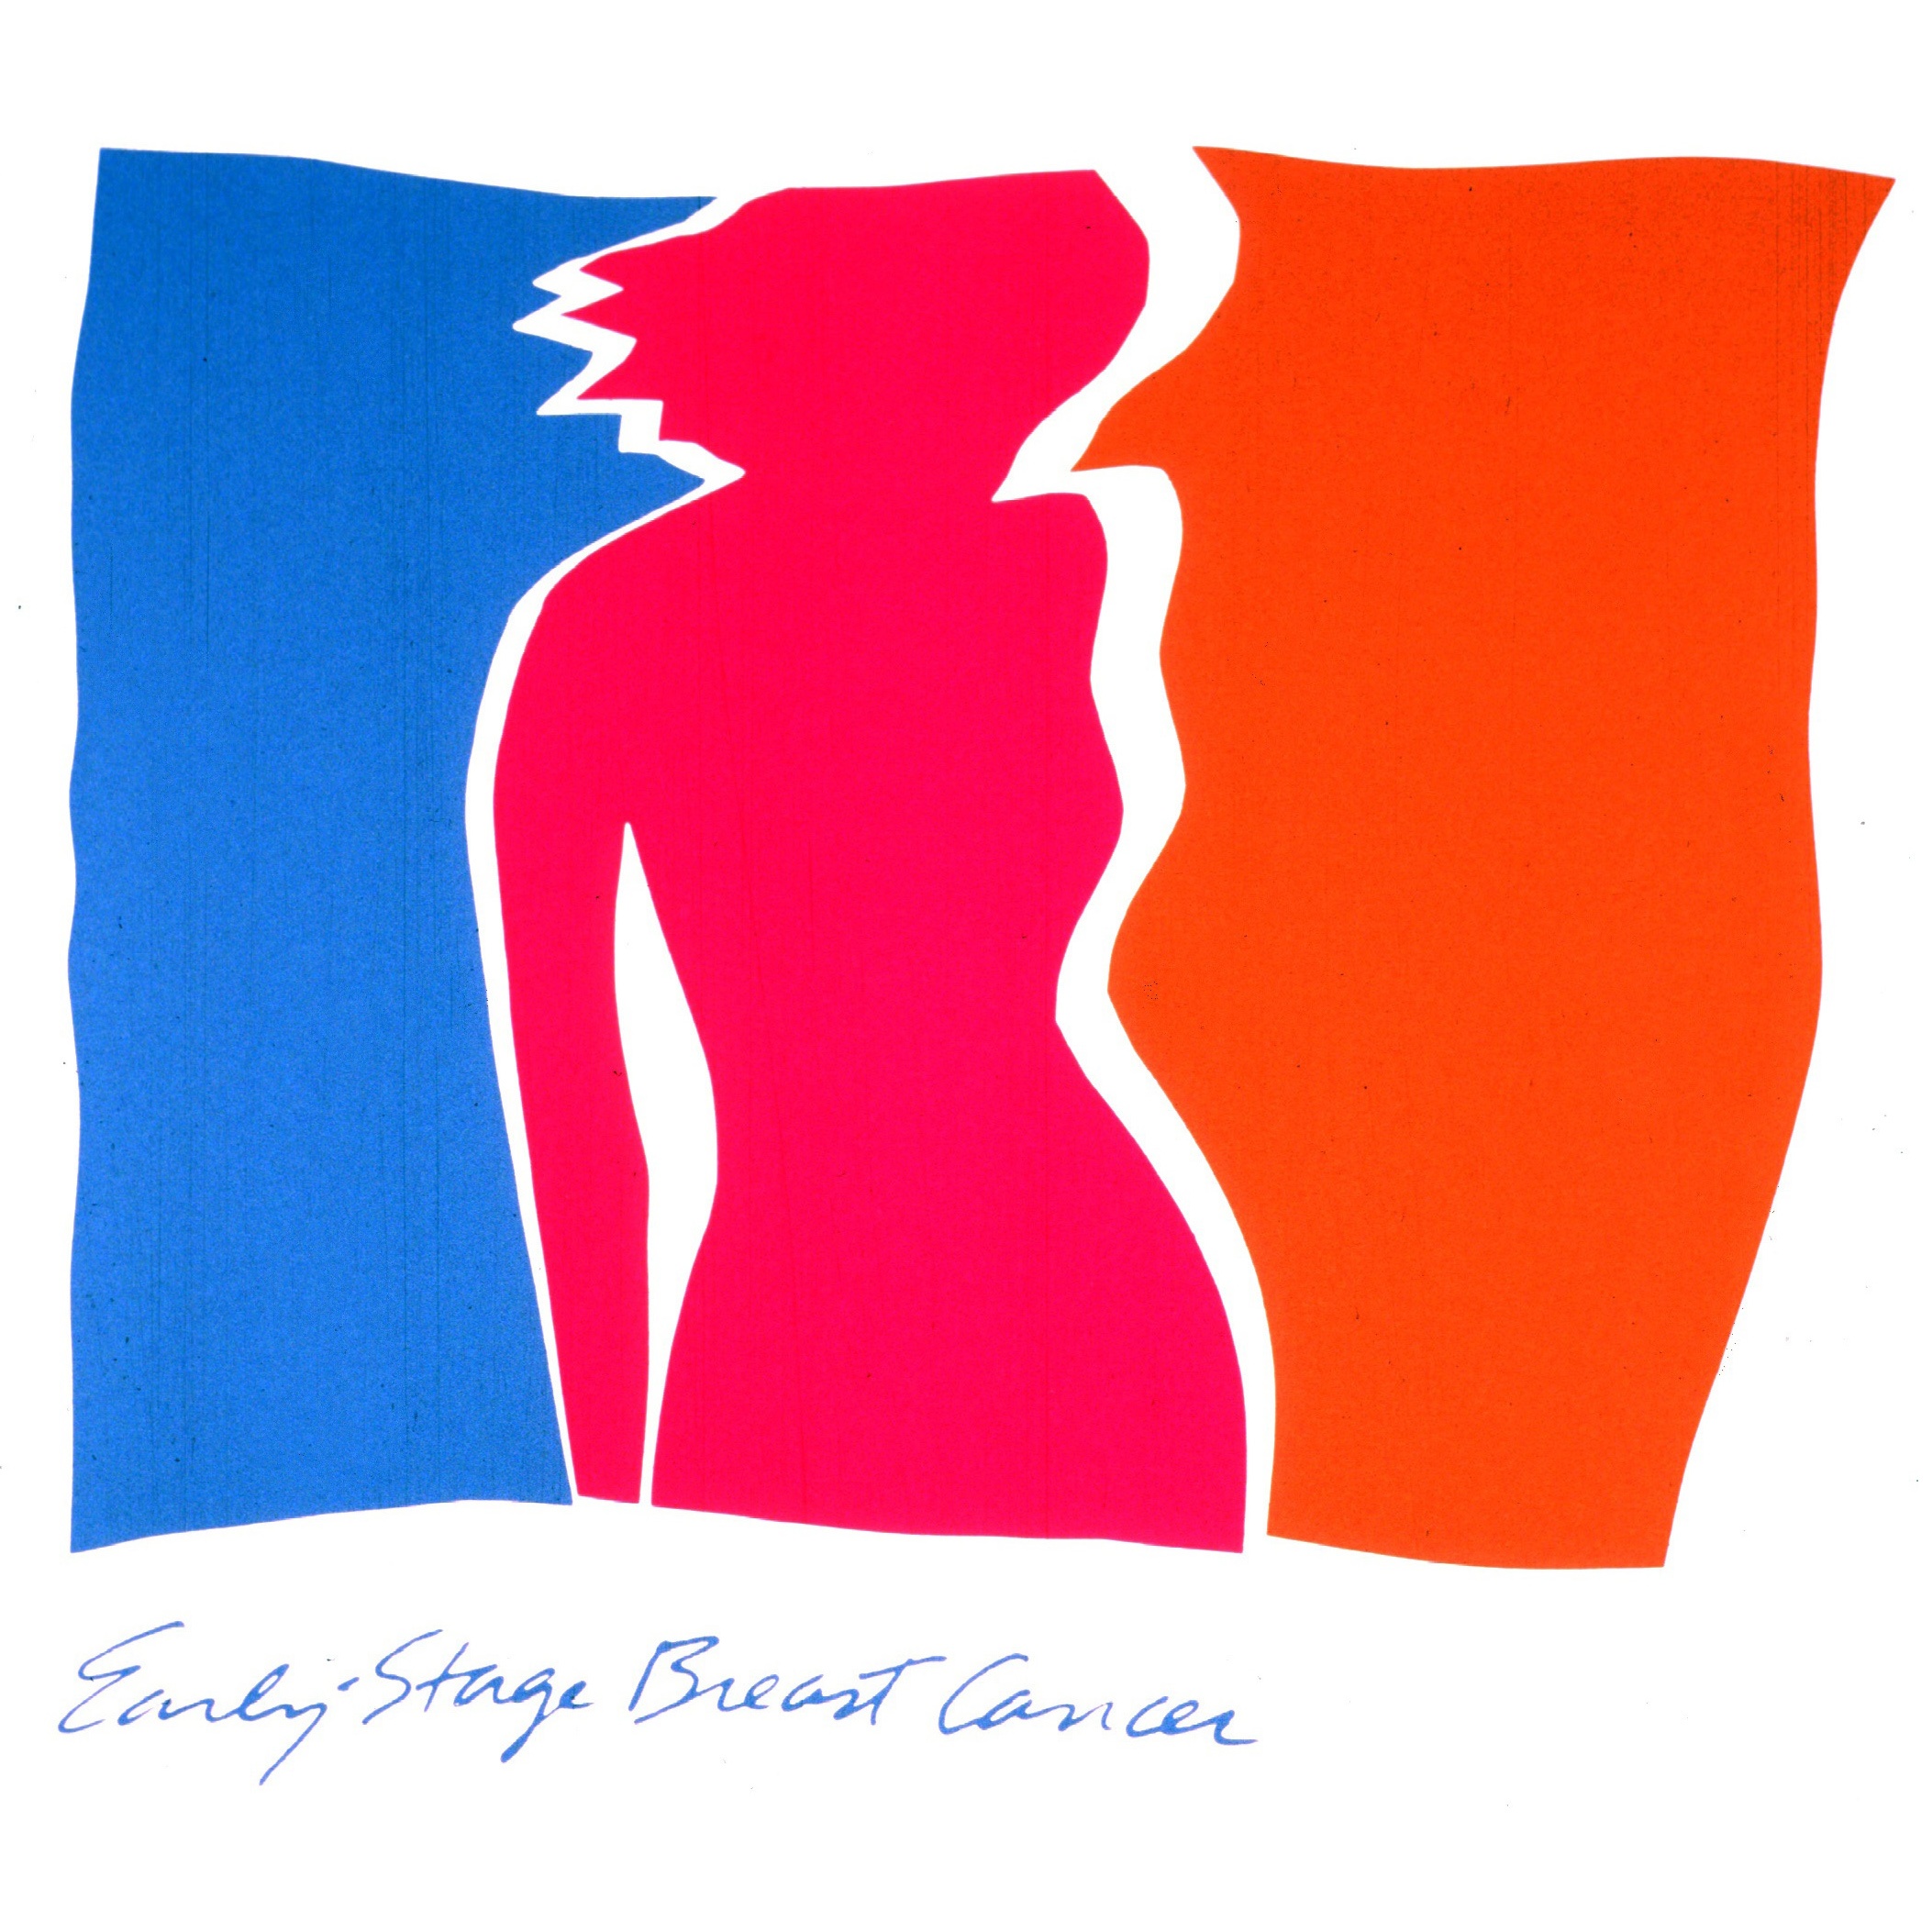 Poster featuring the silhouette of a woman and the title early stage breast cancer